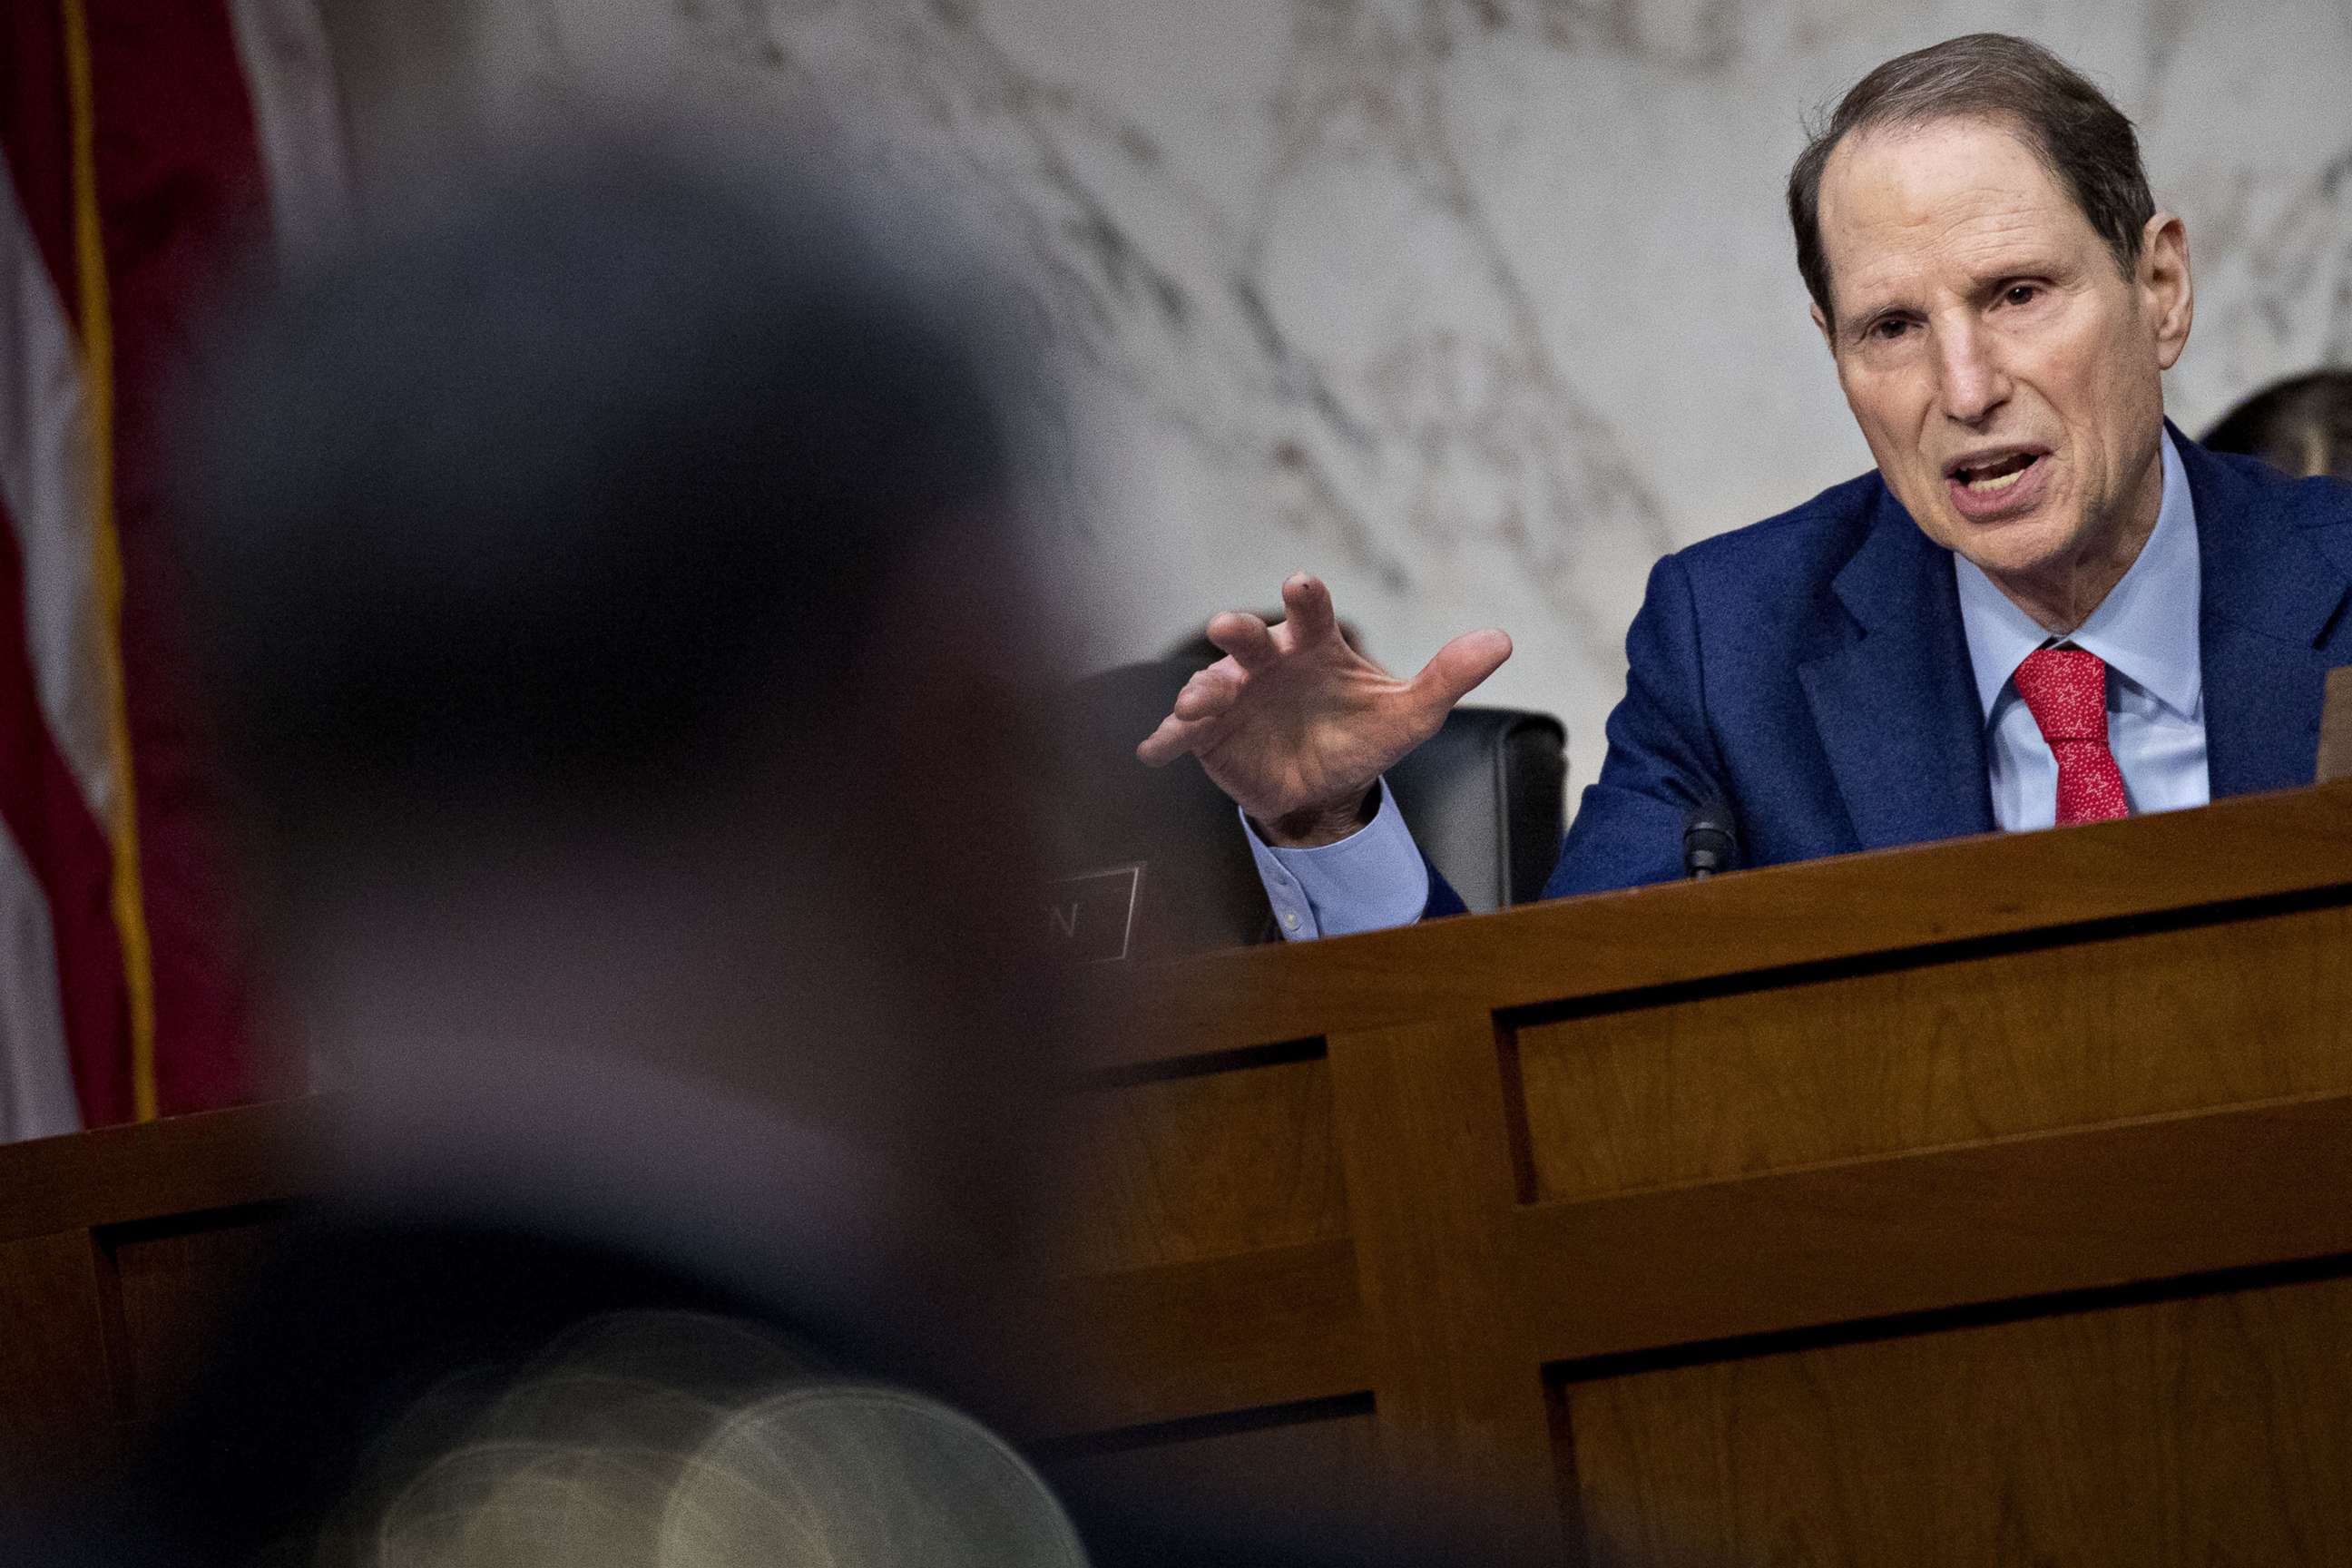 PHOTO: Sen. Ron Wyden, a Democrat from Oregon, questions witnesses during a Senate Intelligence Committee hearing on election security in Washington, D.C., March 21, 2018.